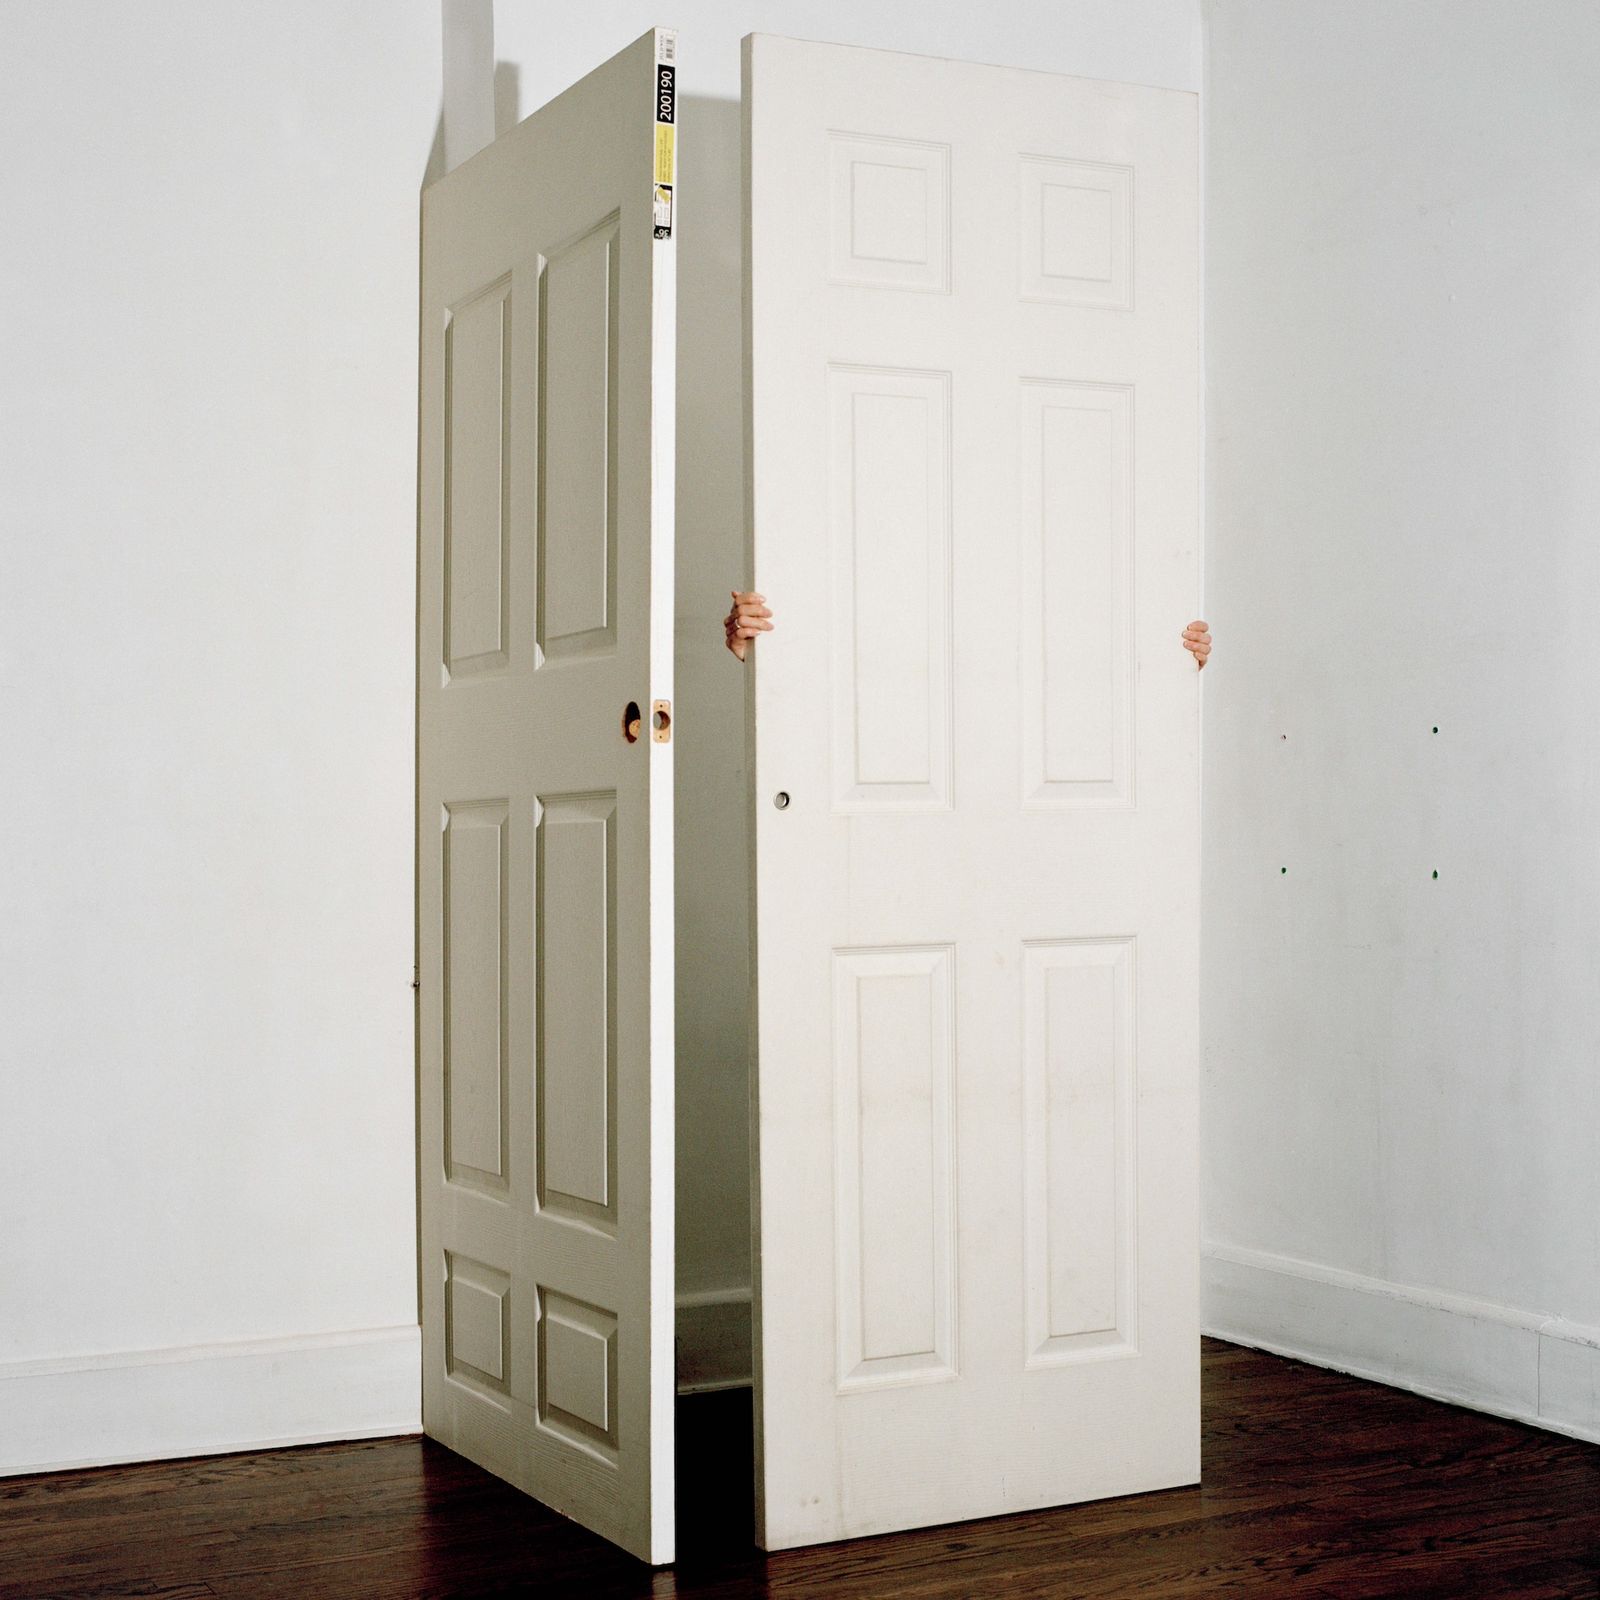 © Su Ji Lee - Two Doors and One Room, 2023, 30x30 inches, Archival pigment print